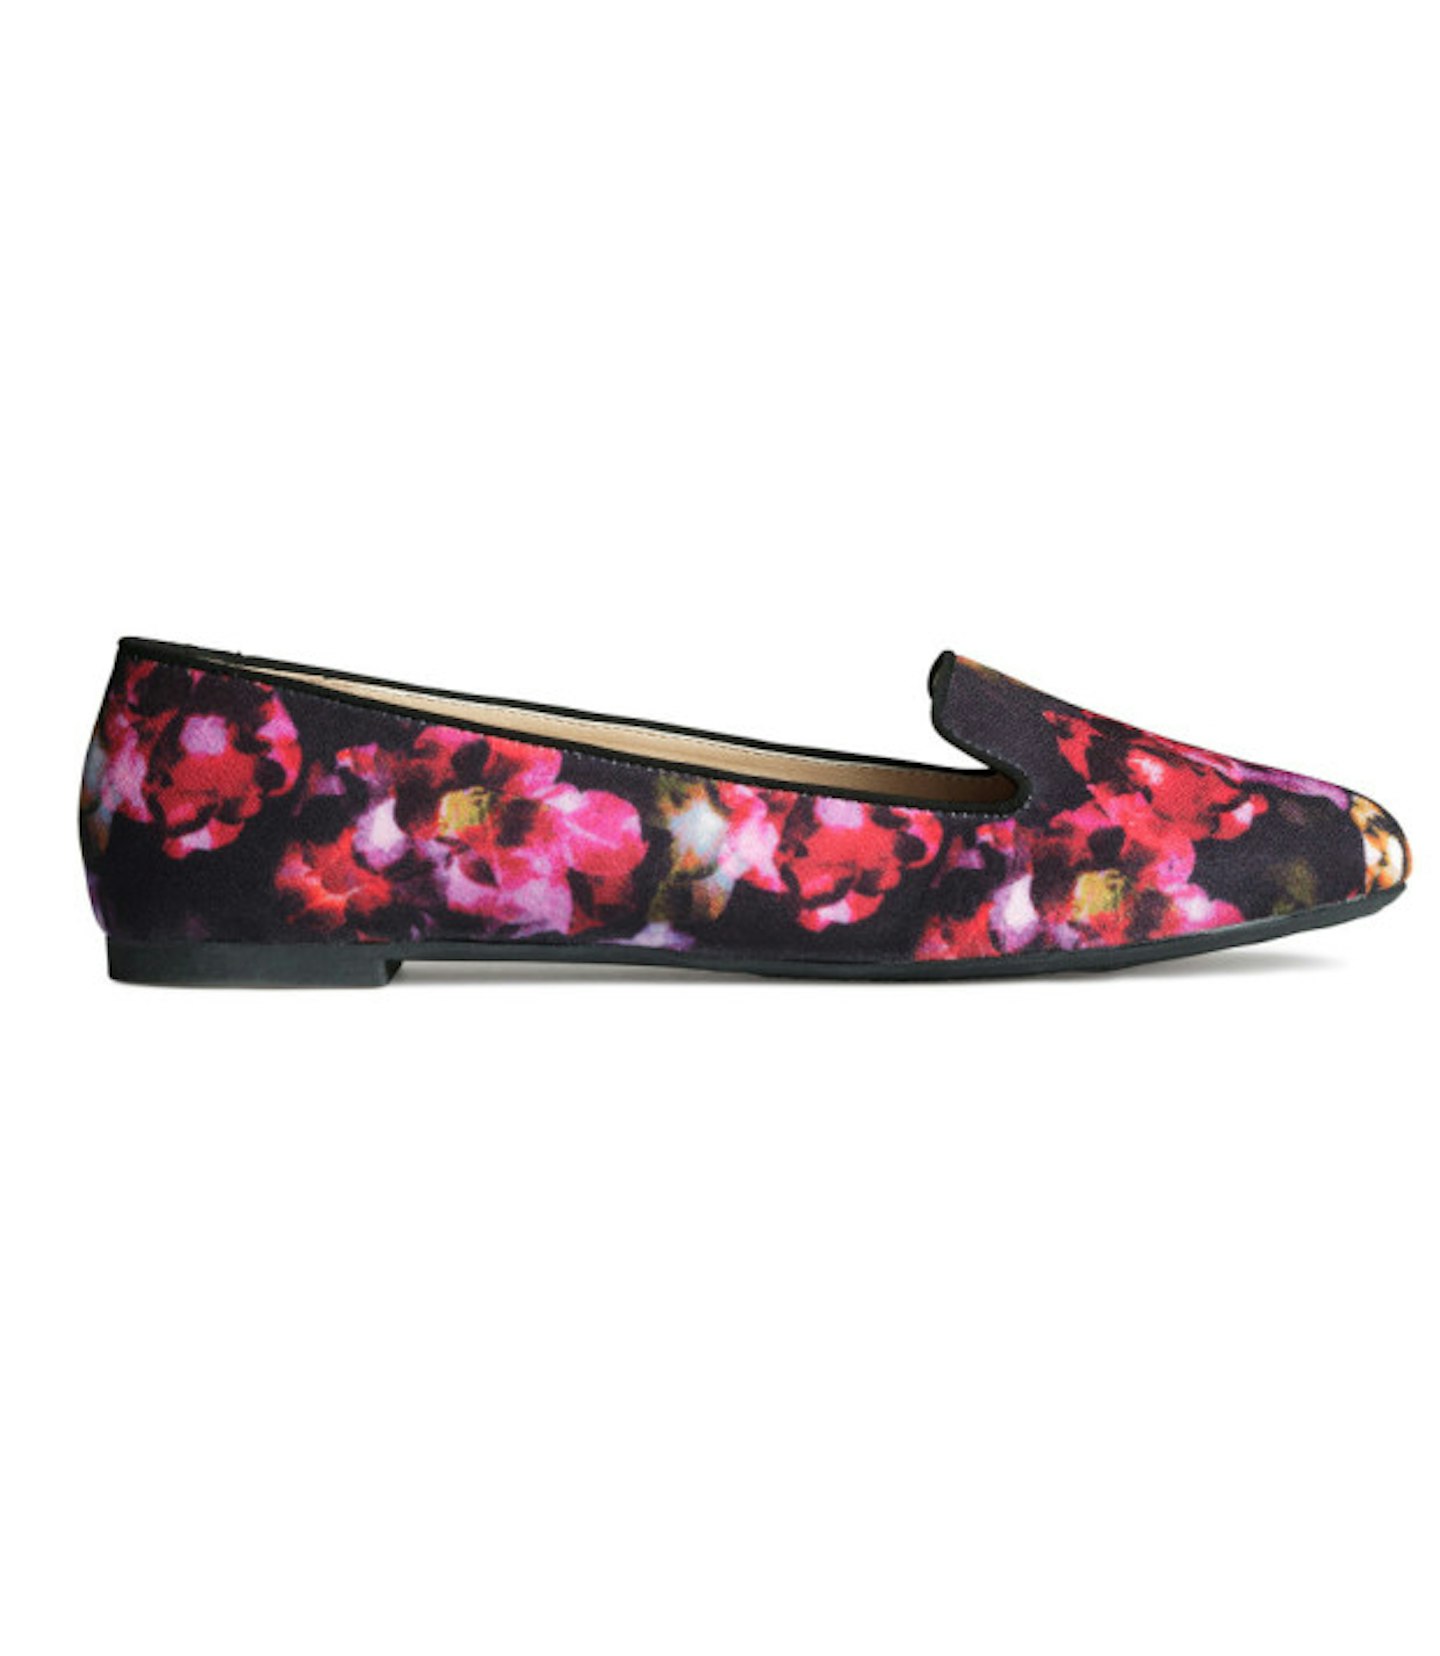 six-o-clock-shoes-hm-floral-printed-slipper-loafer